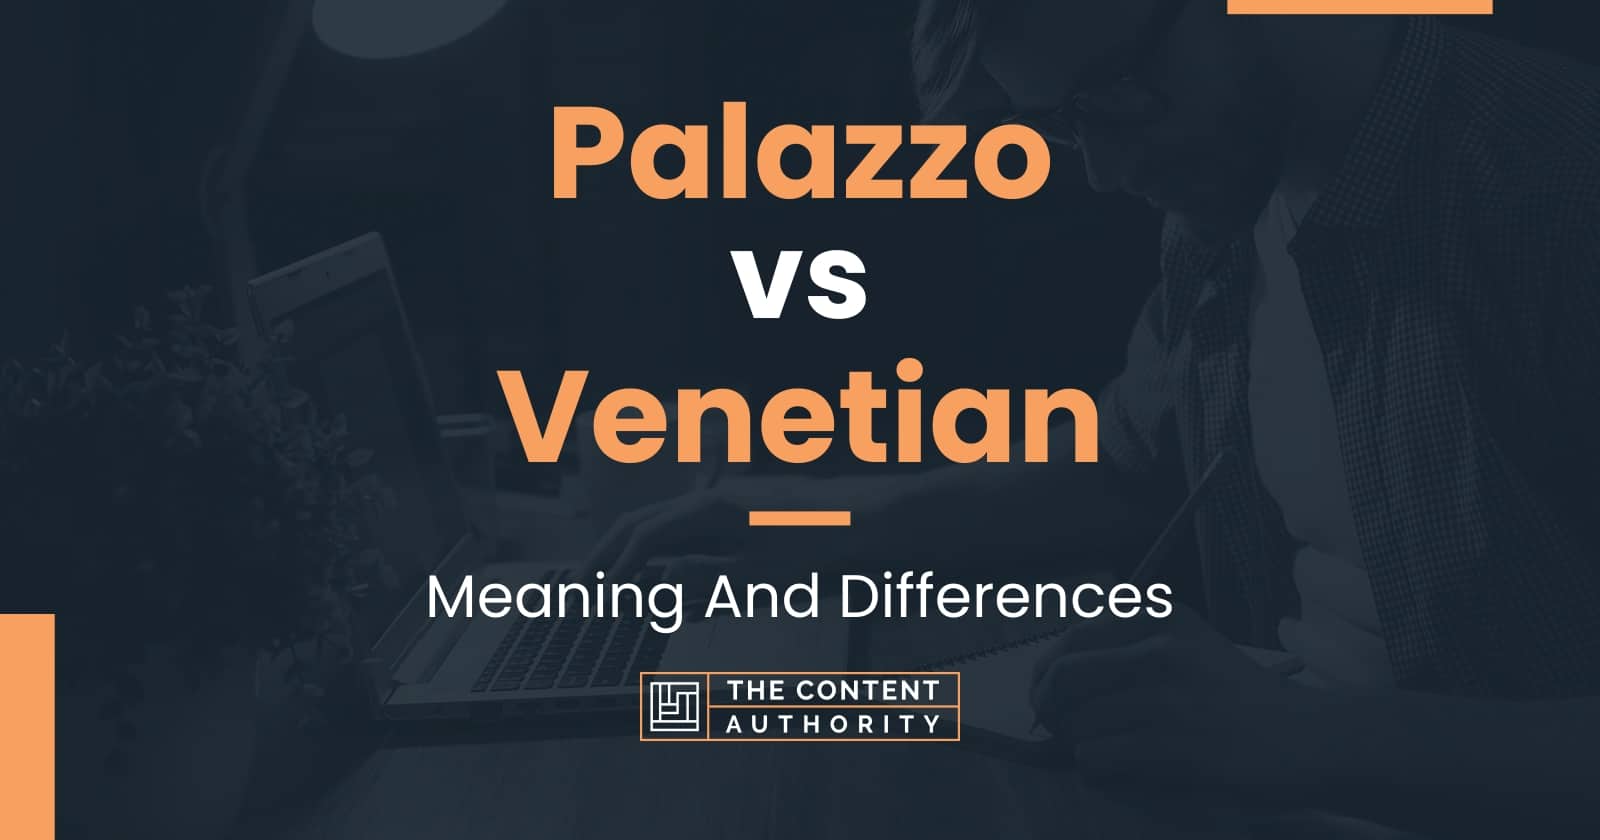 Palazzo vs Meaning And Differences